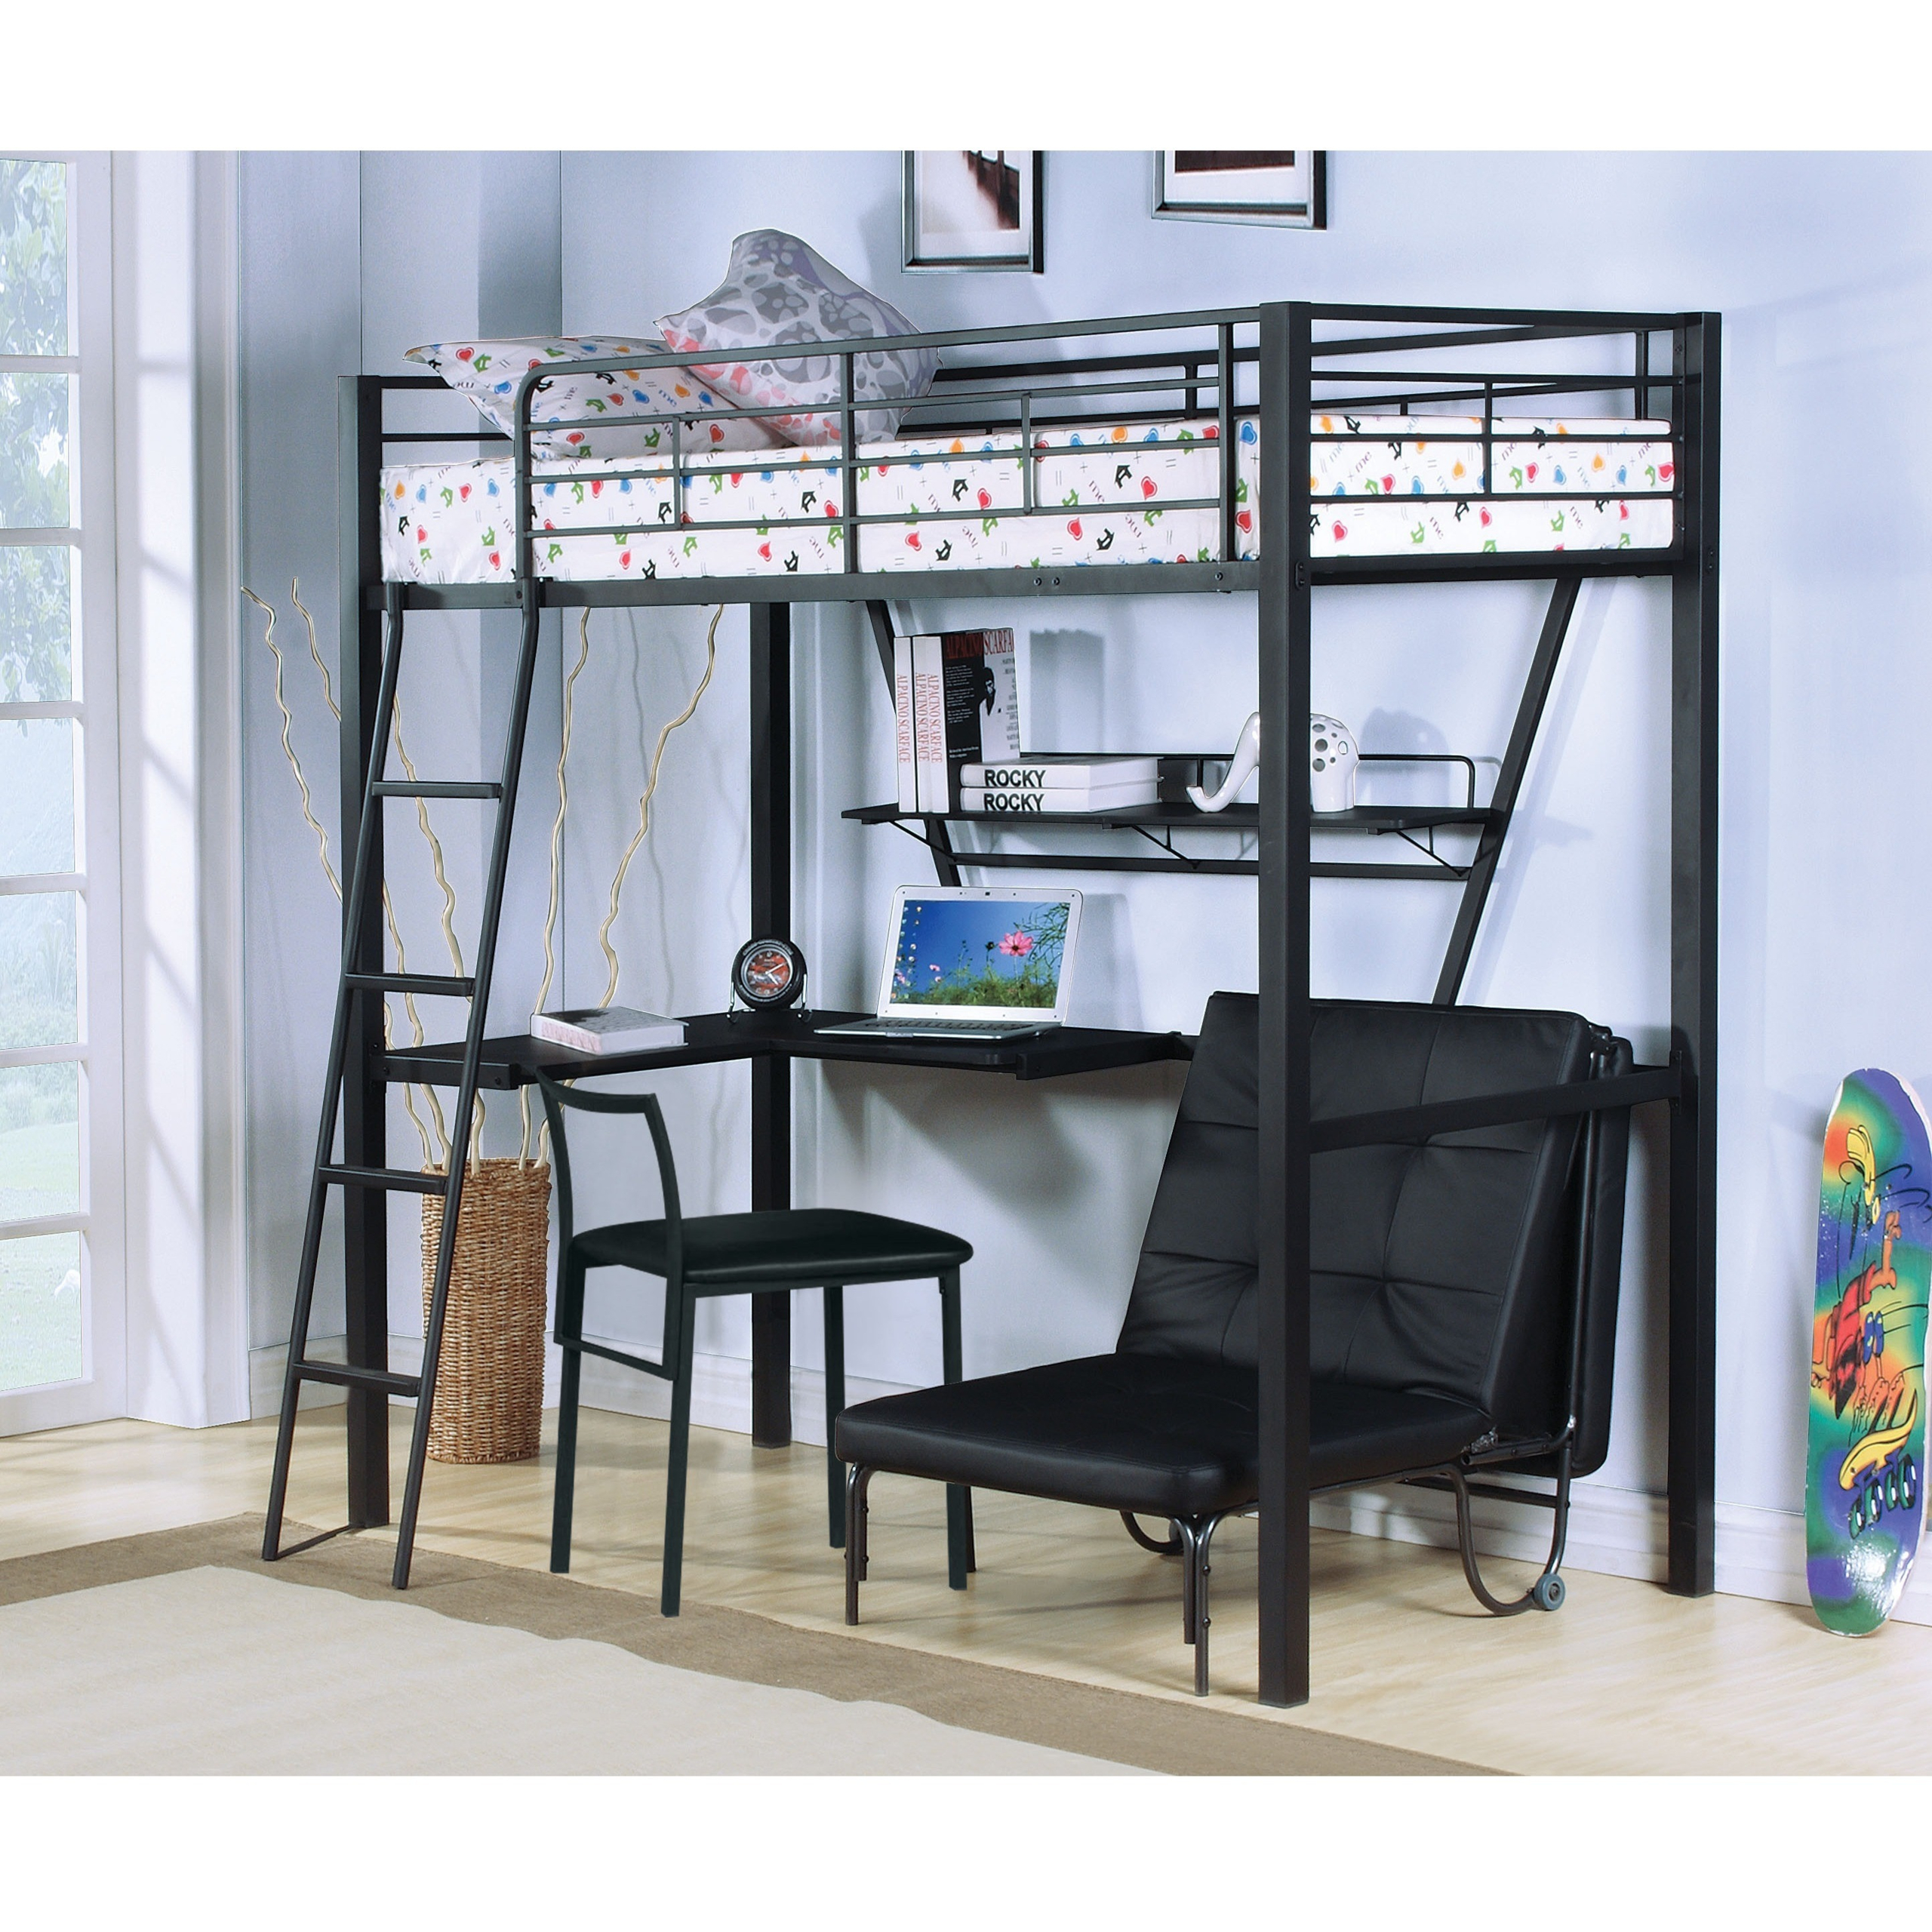 Full Size Loft Bed With Desk Visualhunt, Studio Bunk Bed With Futon Chair